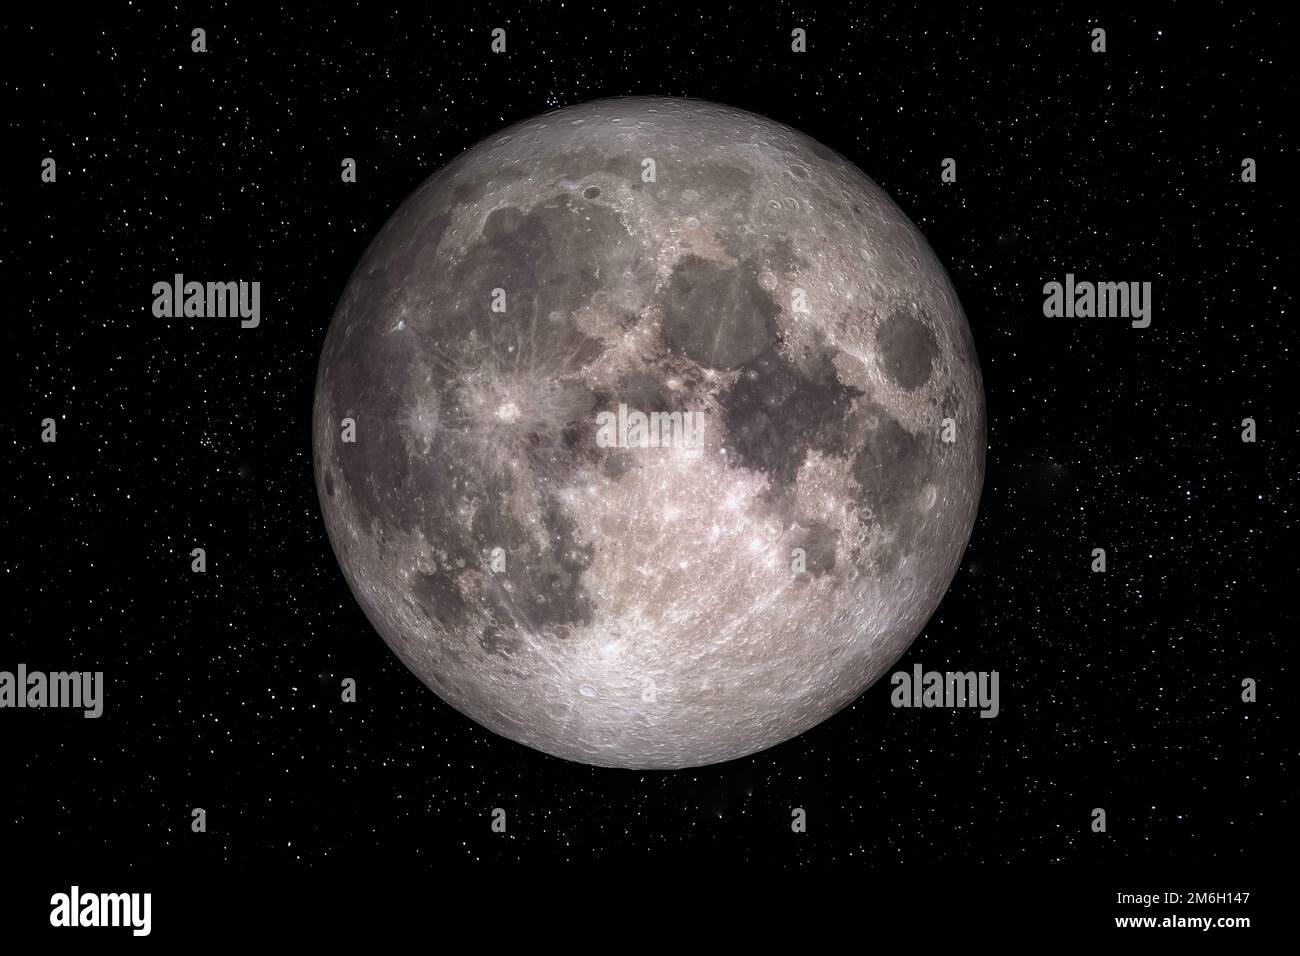 Moon is Earths Satellite orbiting in Space surrounded by Stars. This image elements furnished by NASA. Stock Photo